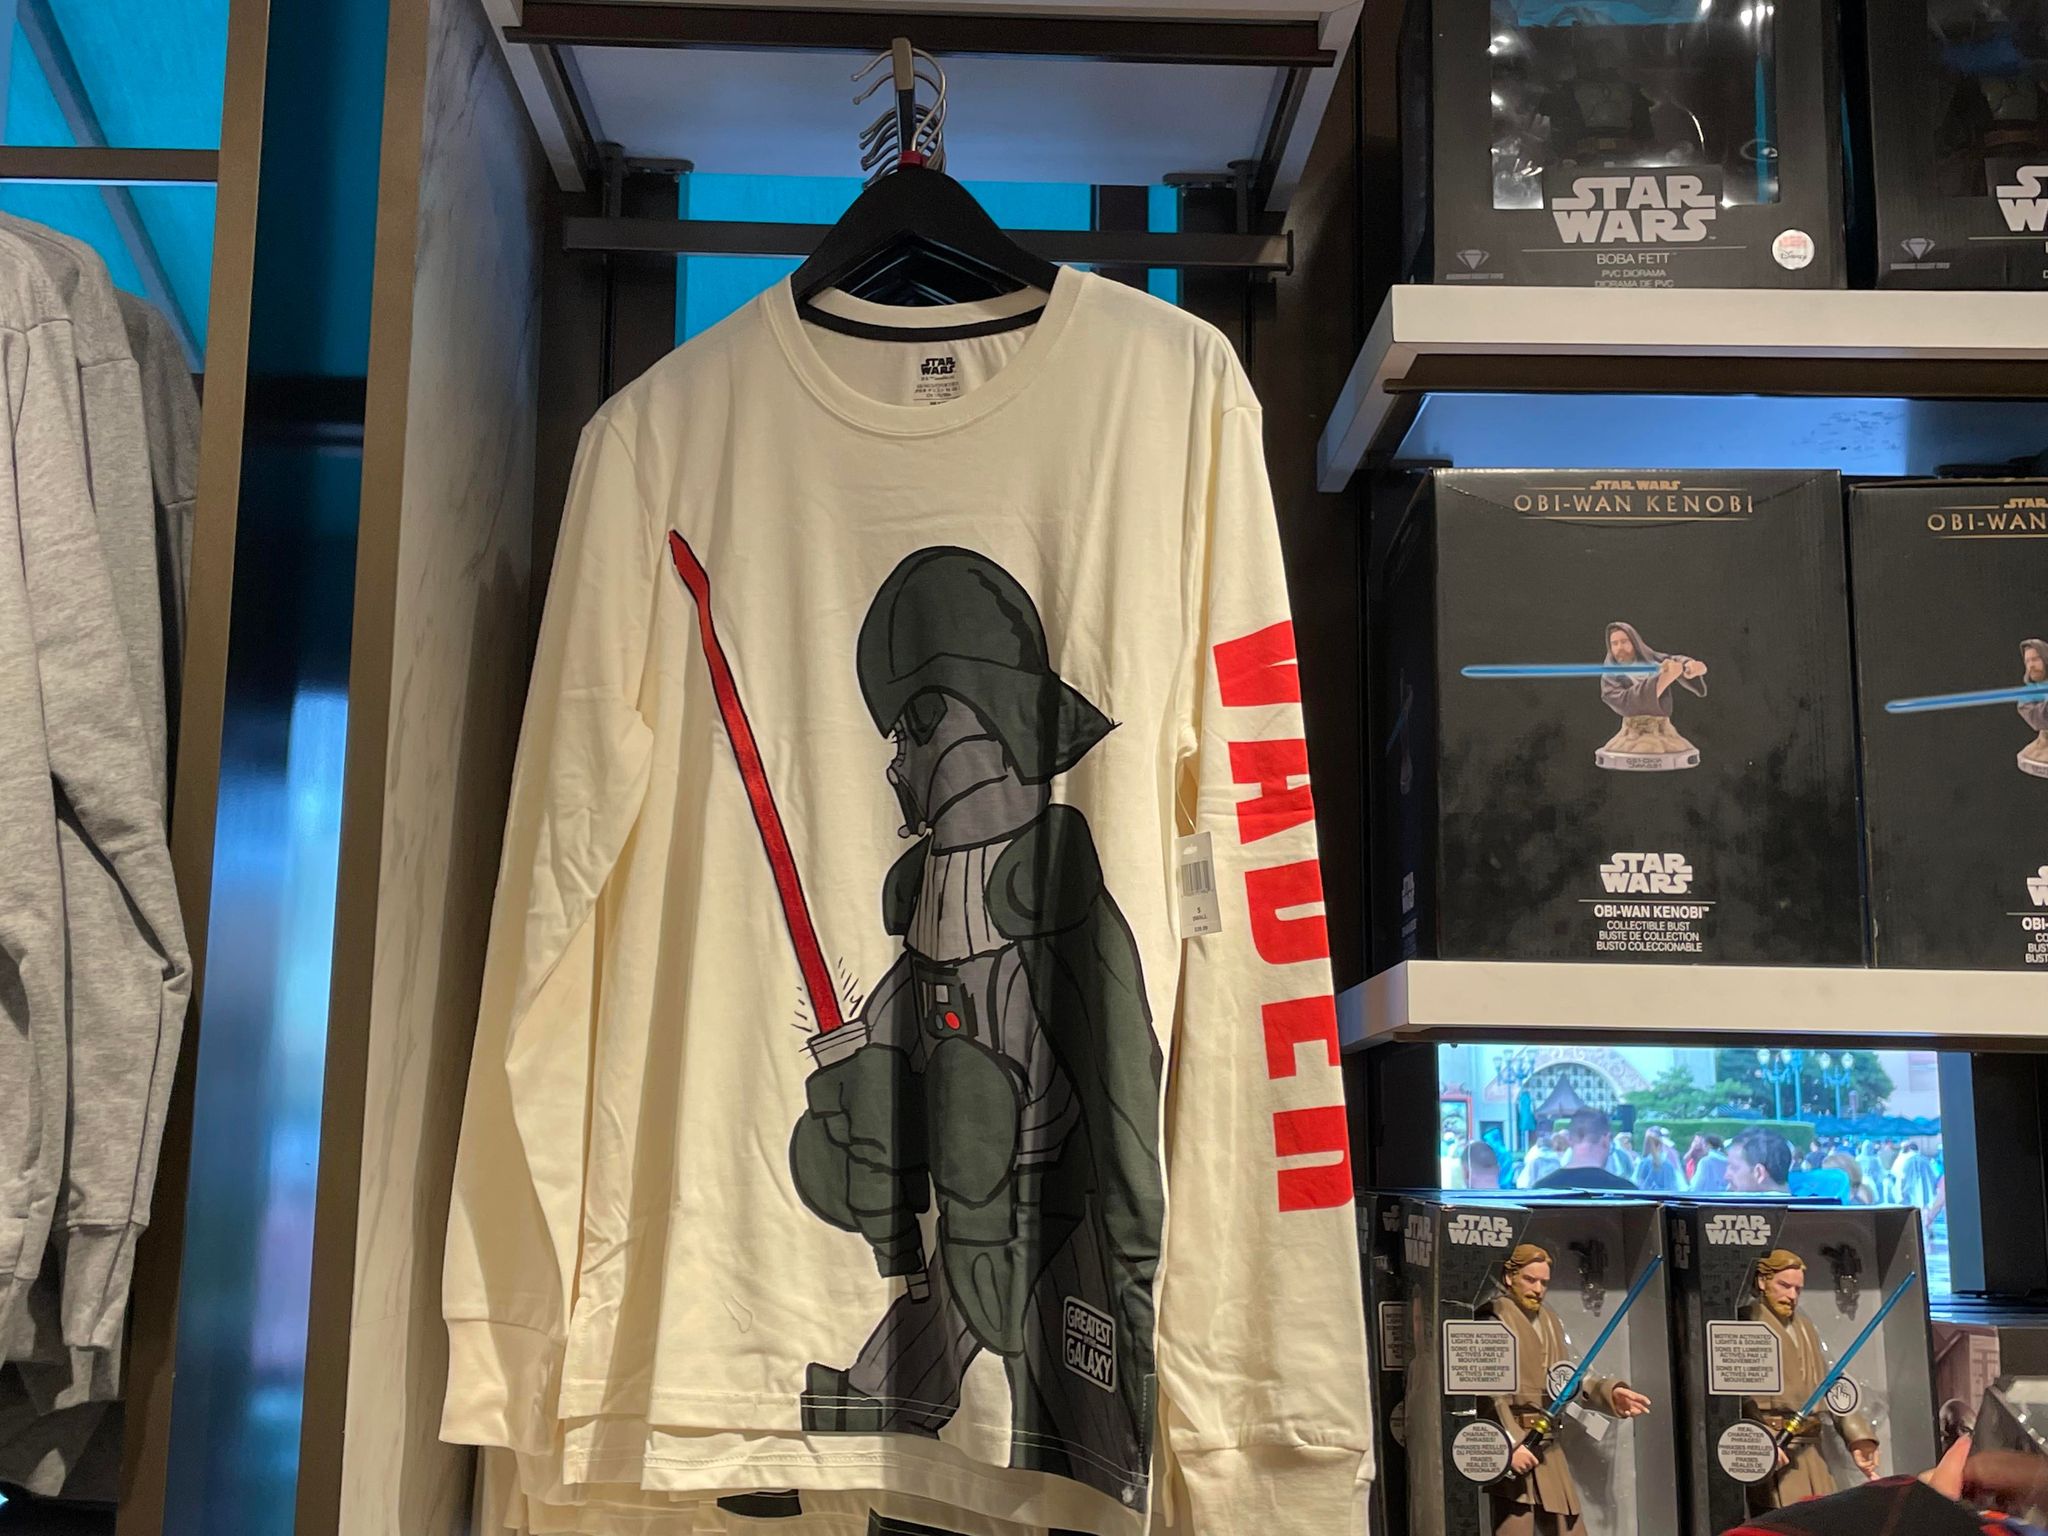 News! Her Universe Star Wars Apparel Has Landed at the Disney